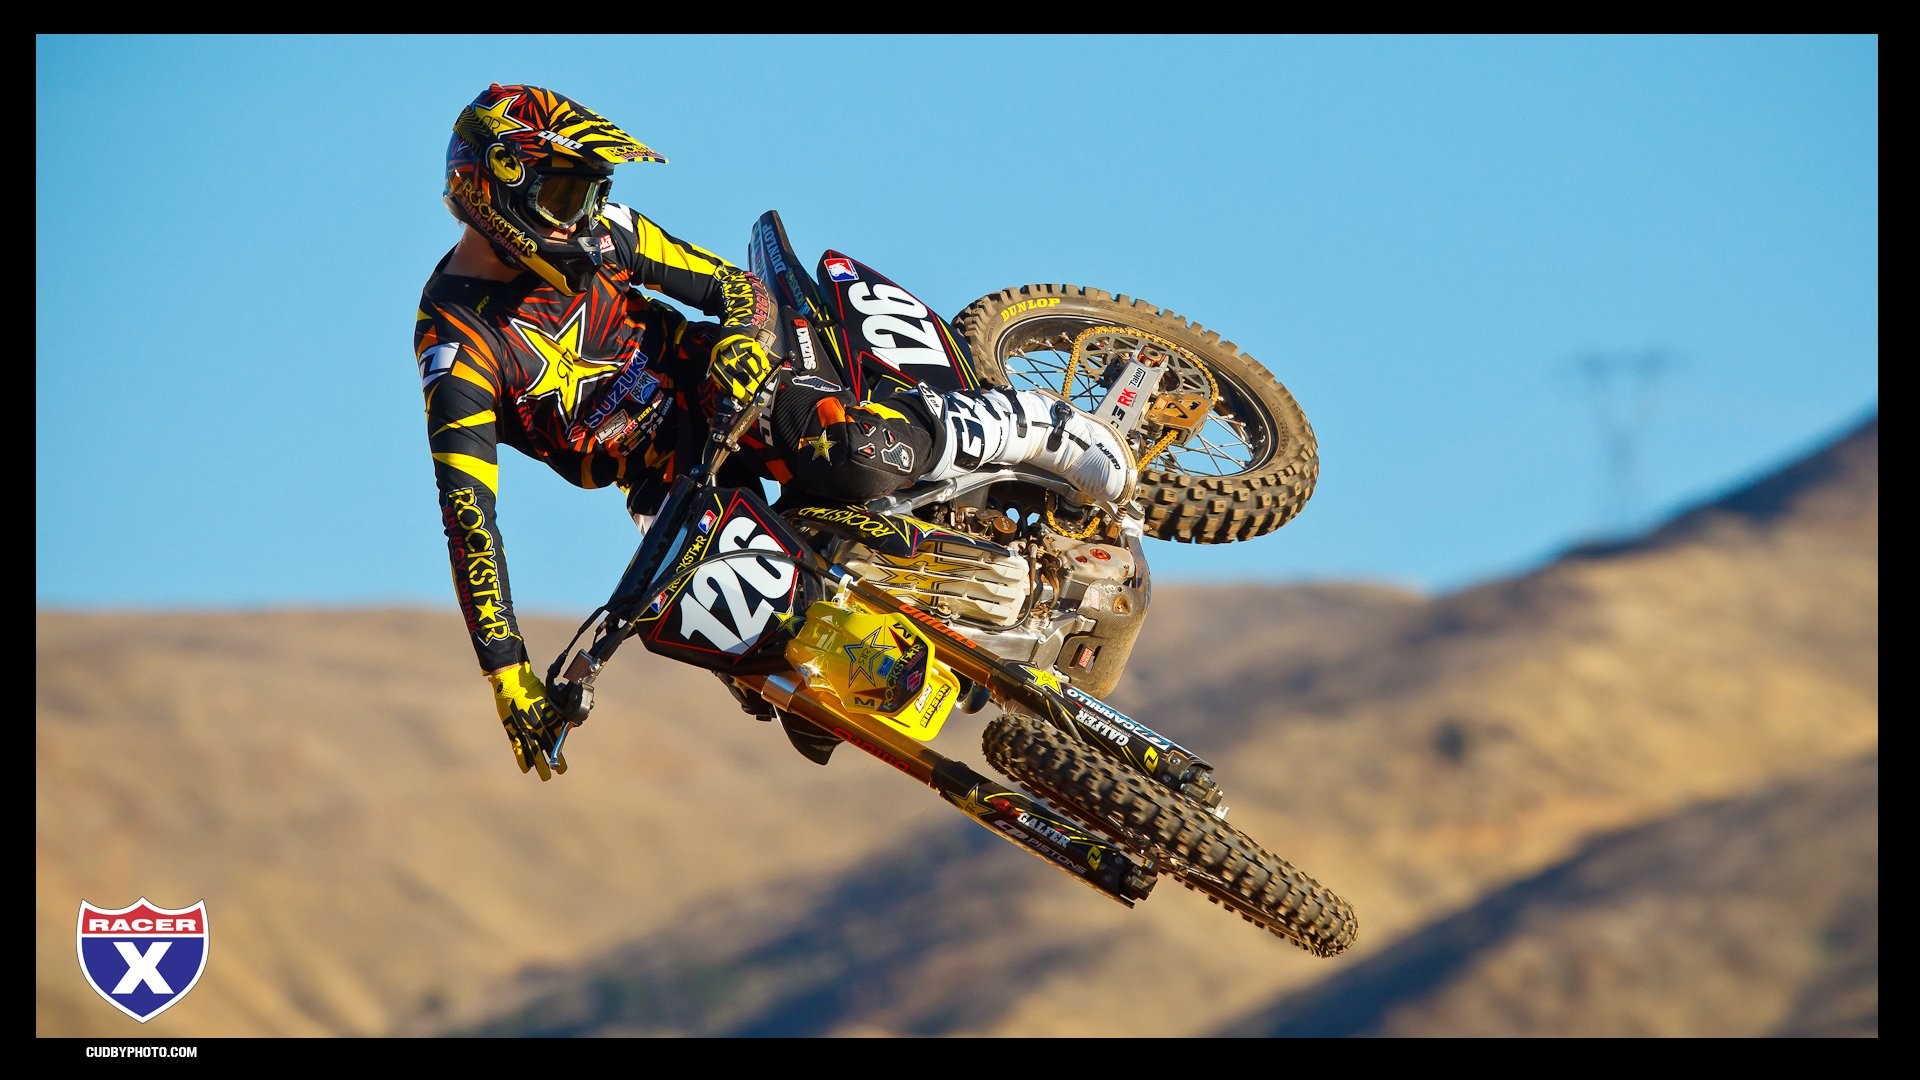 1920x1080 HDQ Images Collection of Dirt Bike: Jaci Bayford